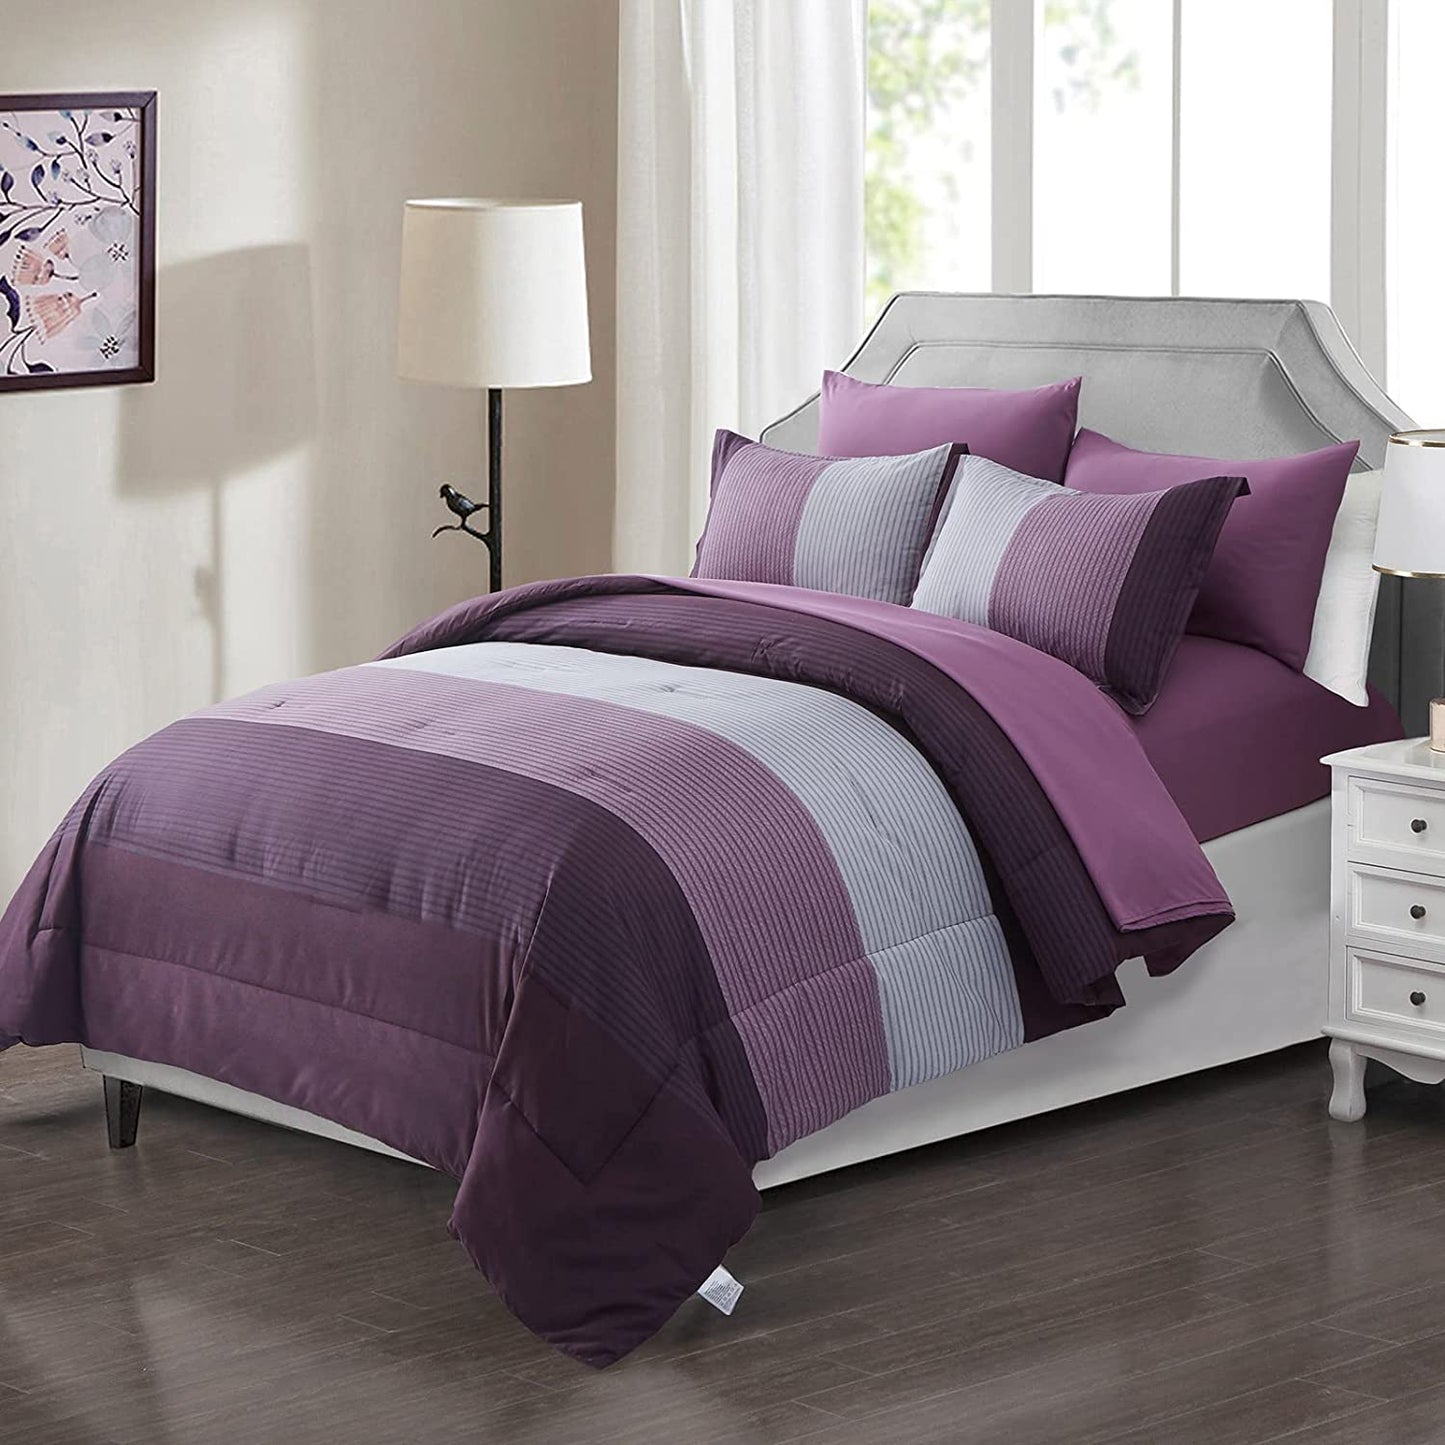 Purple Stripe Queen Comforter Set 7 Pieces Stripe Comforter Sets with Comforter, Pillowshams, Flat Sheet, Fitted Sheet and Pillowcases